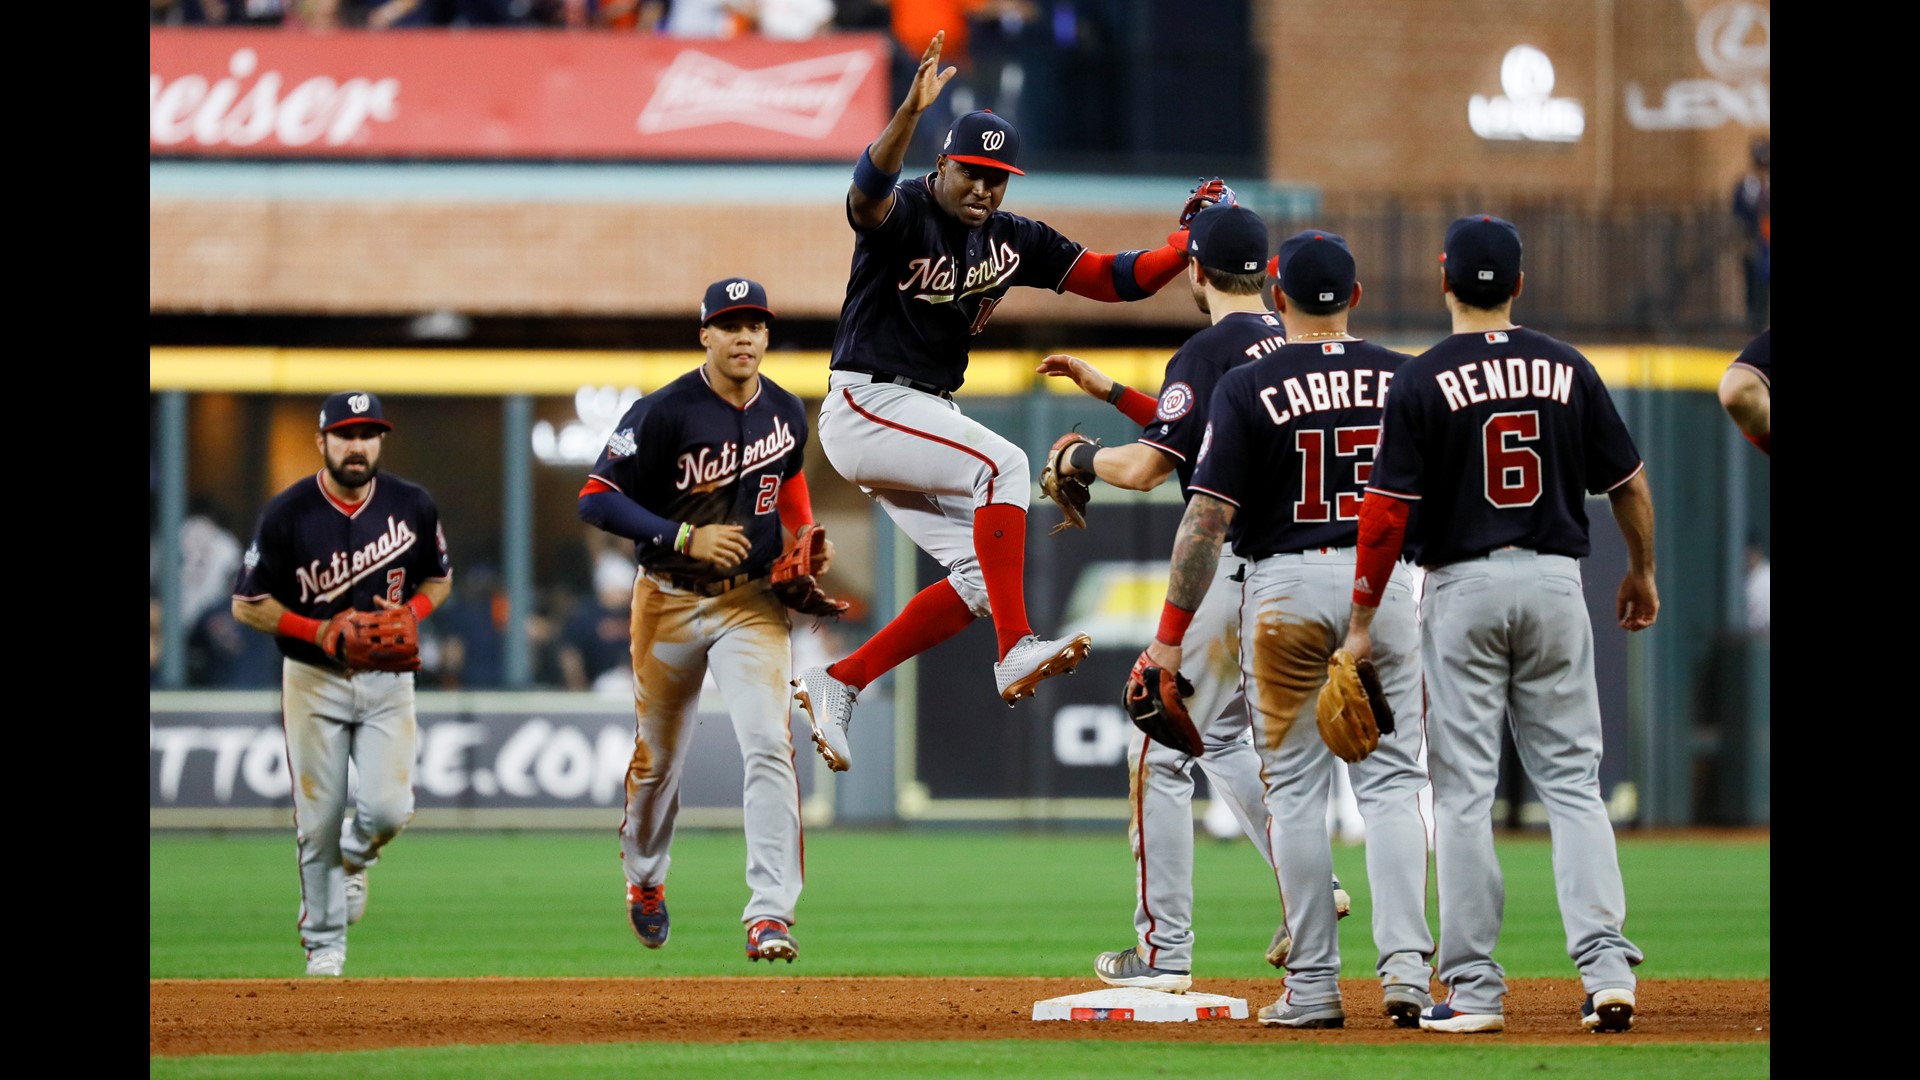 The Nats defeated the Astros 5-4 during their first-ever World Series appearance.